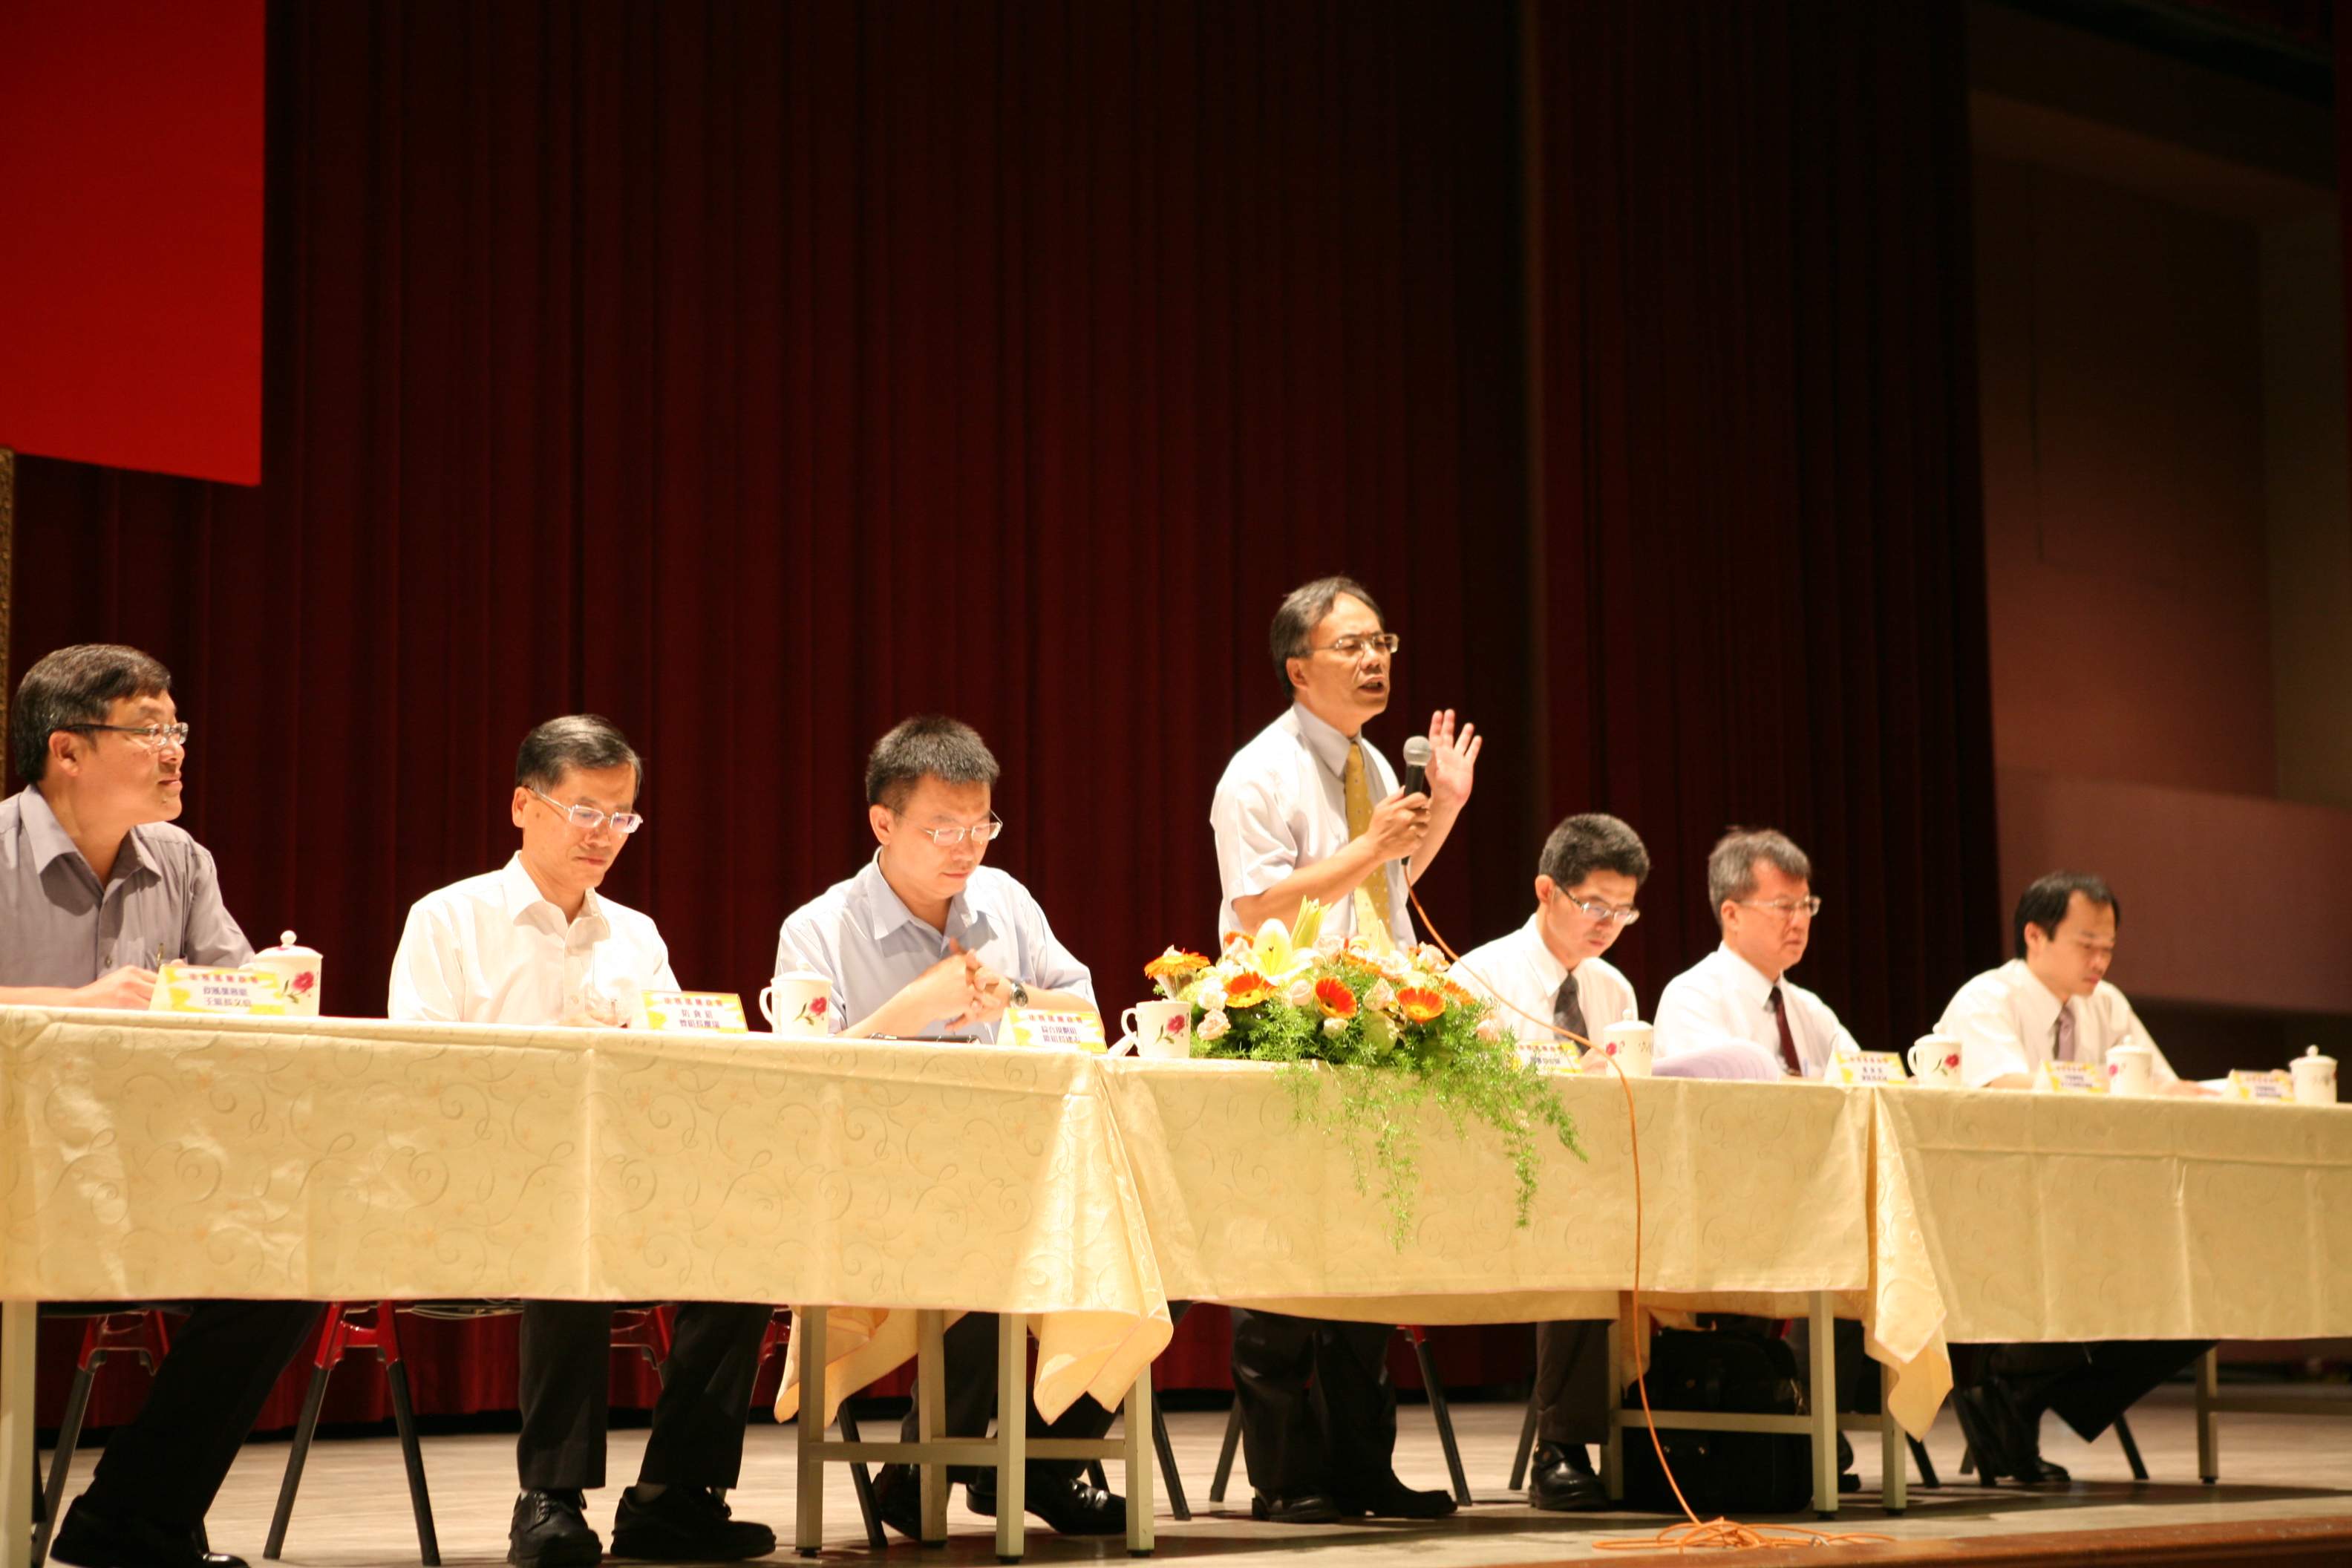 On August 12, 2011, the Director General of the Agency Against Corruption hosted the “Administrators of Civil Ethics Convention” for the central Taiwan region.